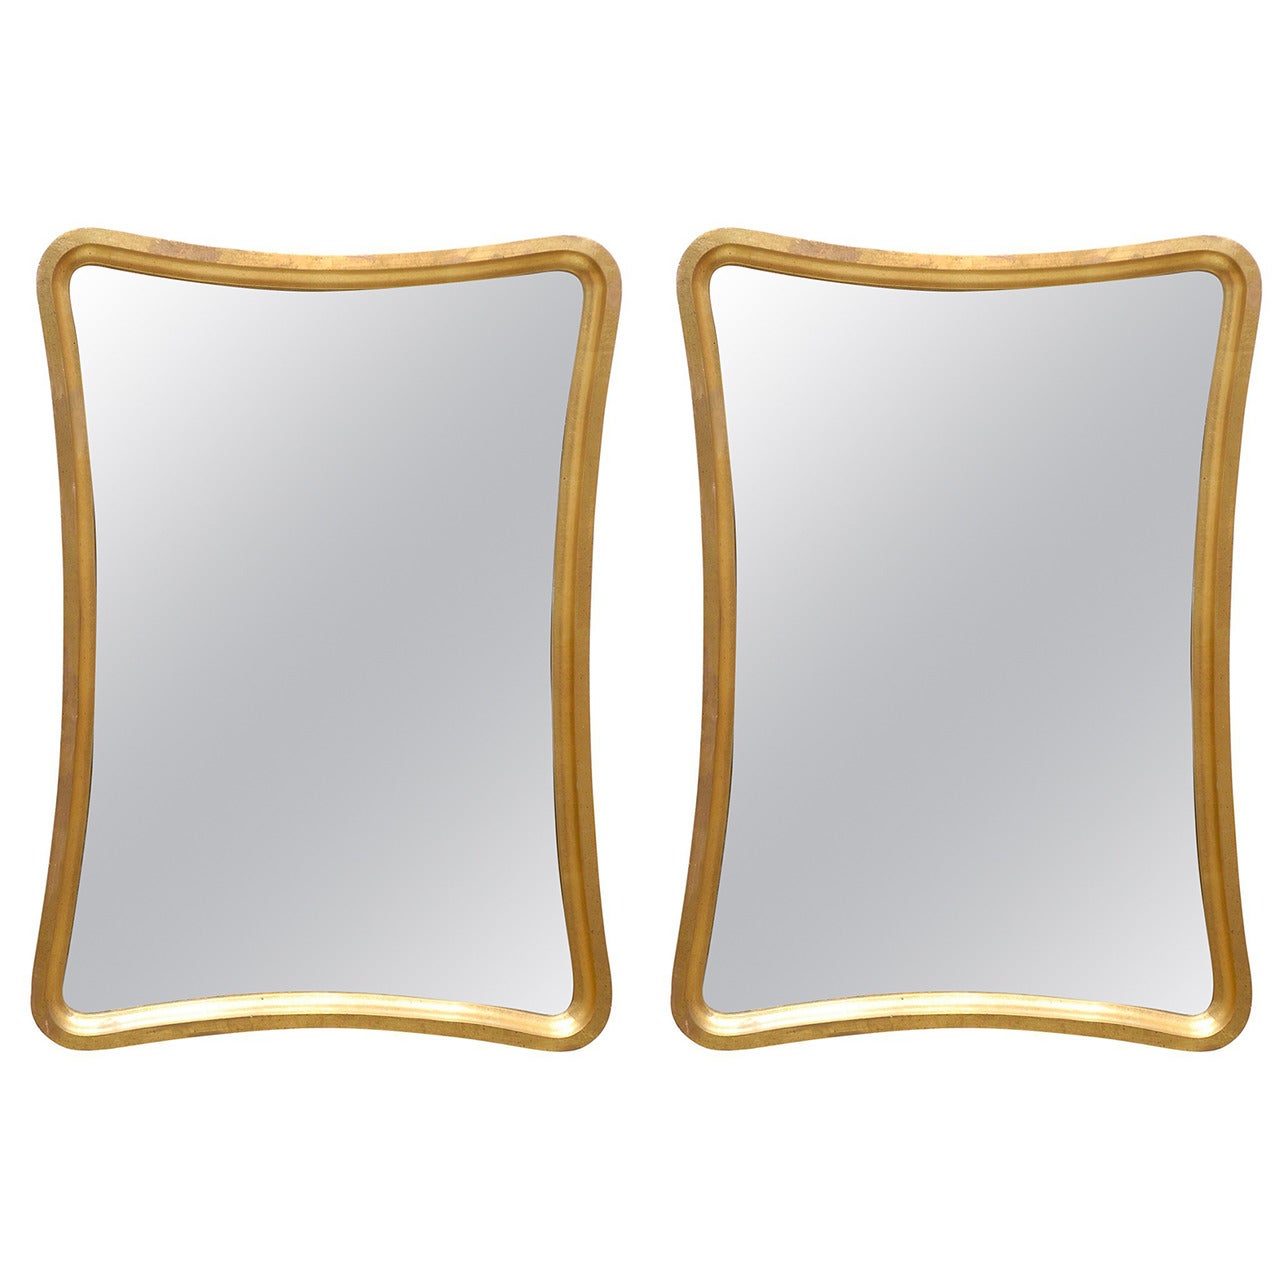 Sophisticated Pair of Modern Mirrors in Gold Leaf